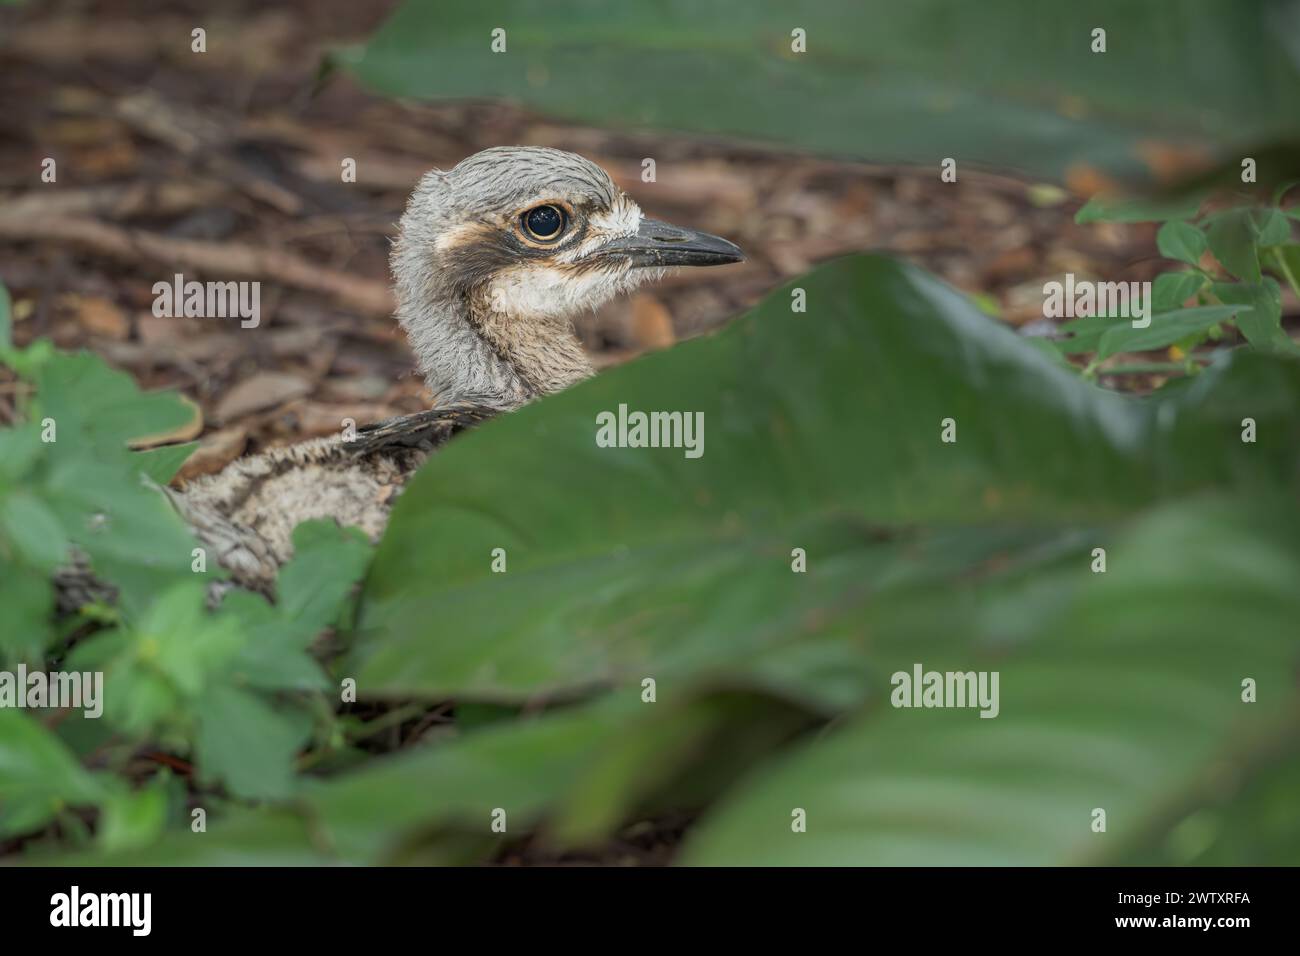 A single juvenile Bush Stone -Curlew secreted away under foliage by the parents maintaining wonderful camouflage and perfect stillness. Stock Photo